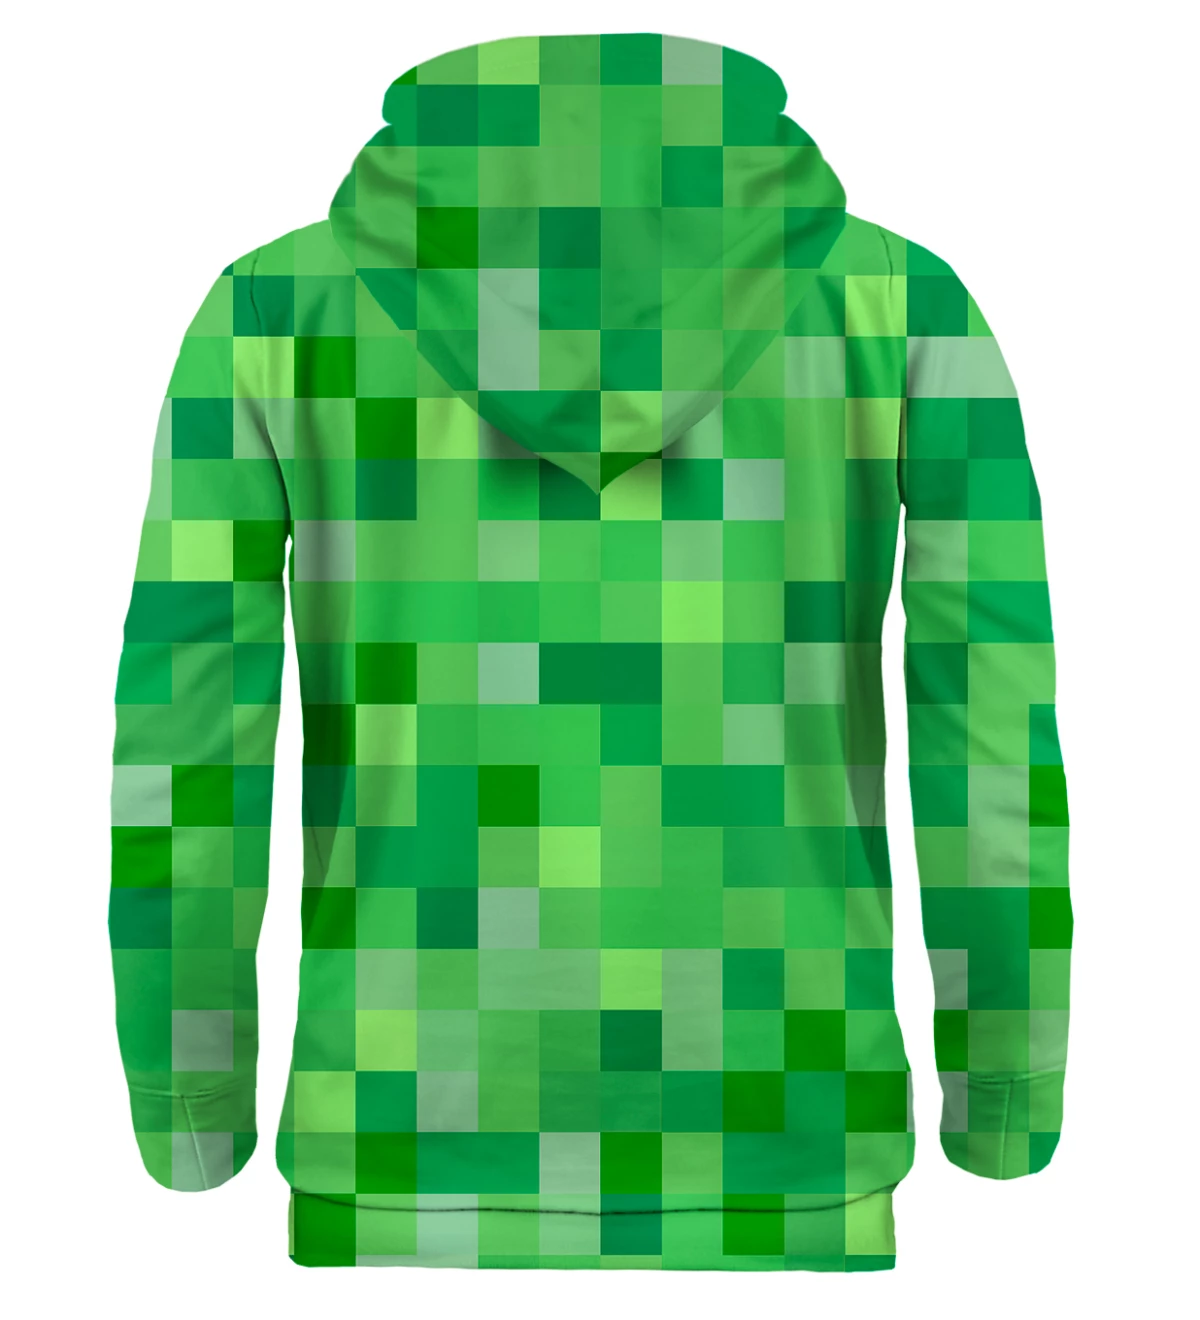 Green Sweatshirt Template with a Muzzle and Pant for Roblox - Mediamodifier